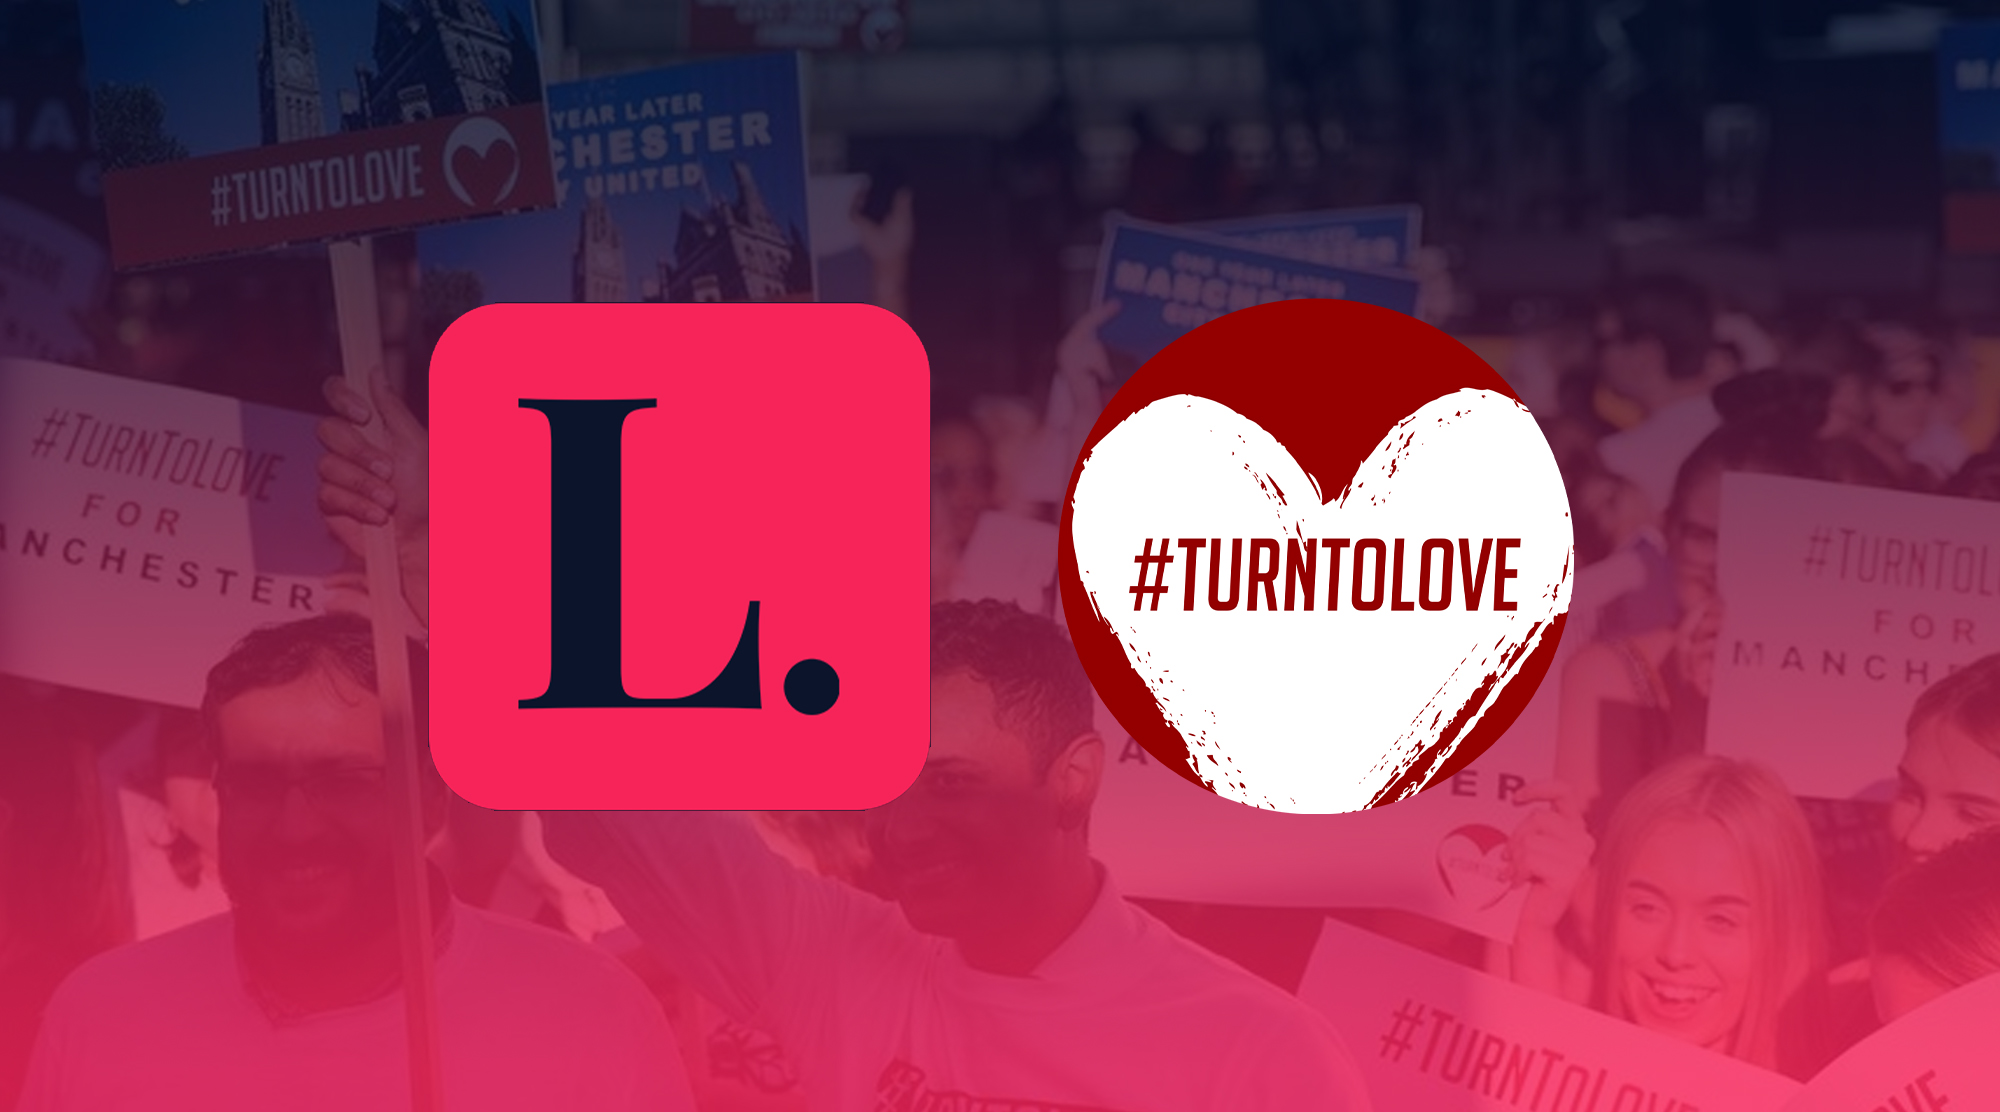 Logically creates bespoke Browser Extension, FlagIt, to support #TurnToLove in its mission to eliminate hate